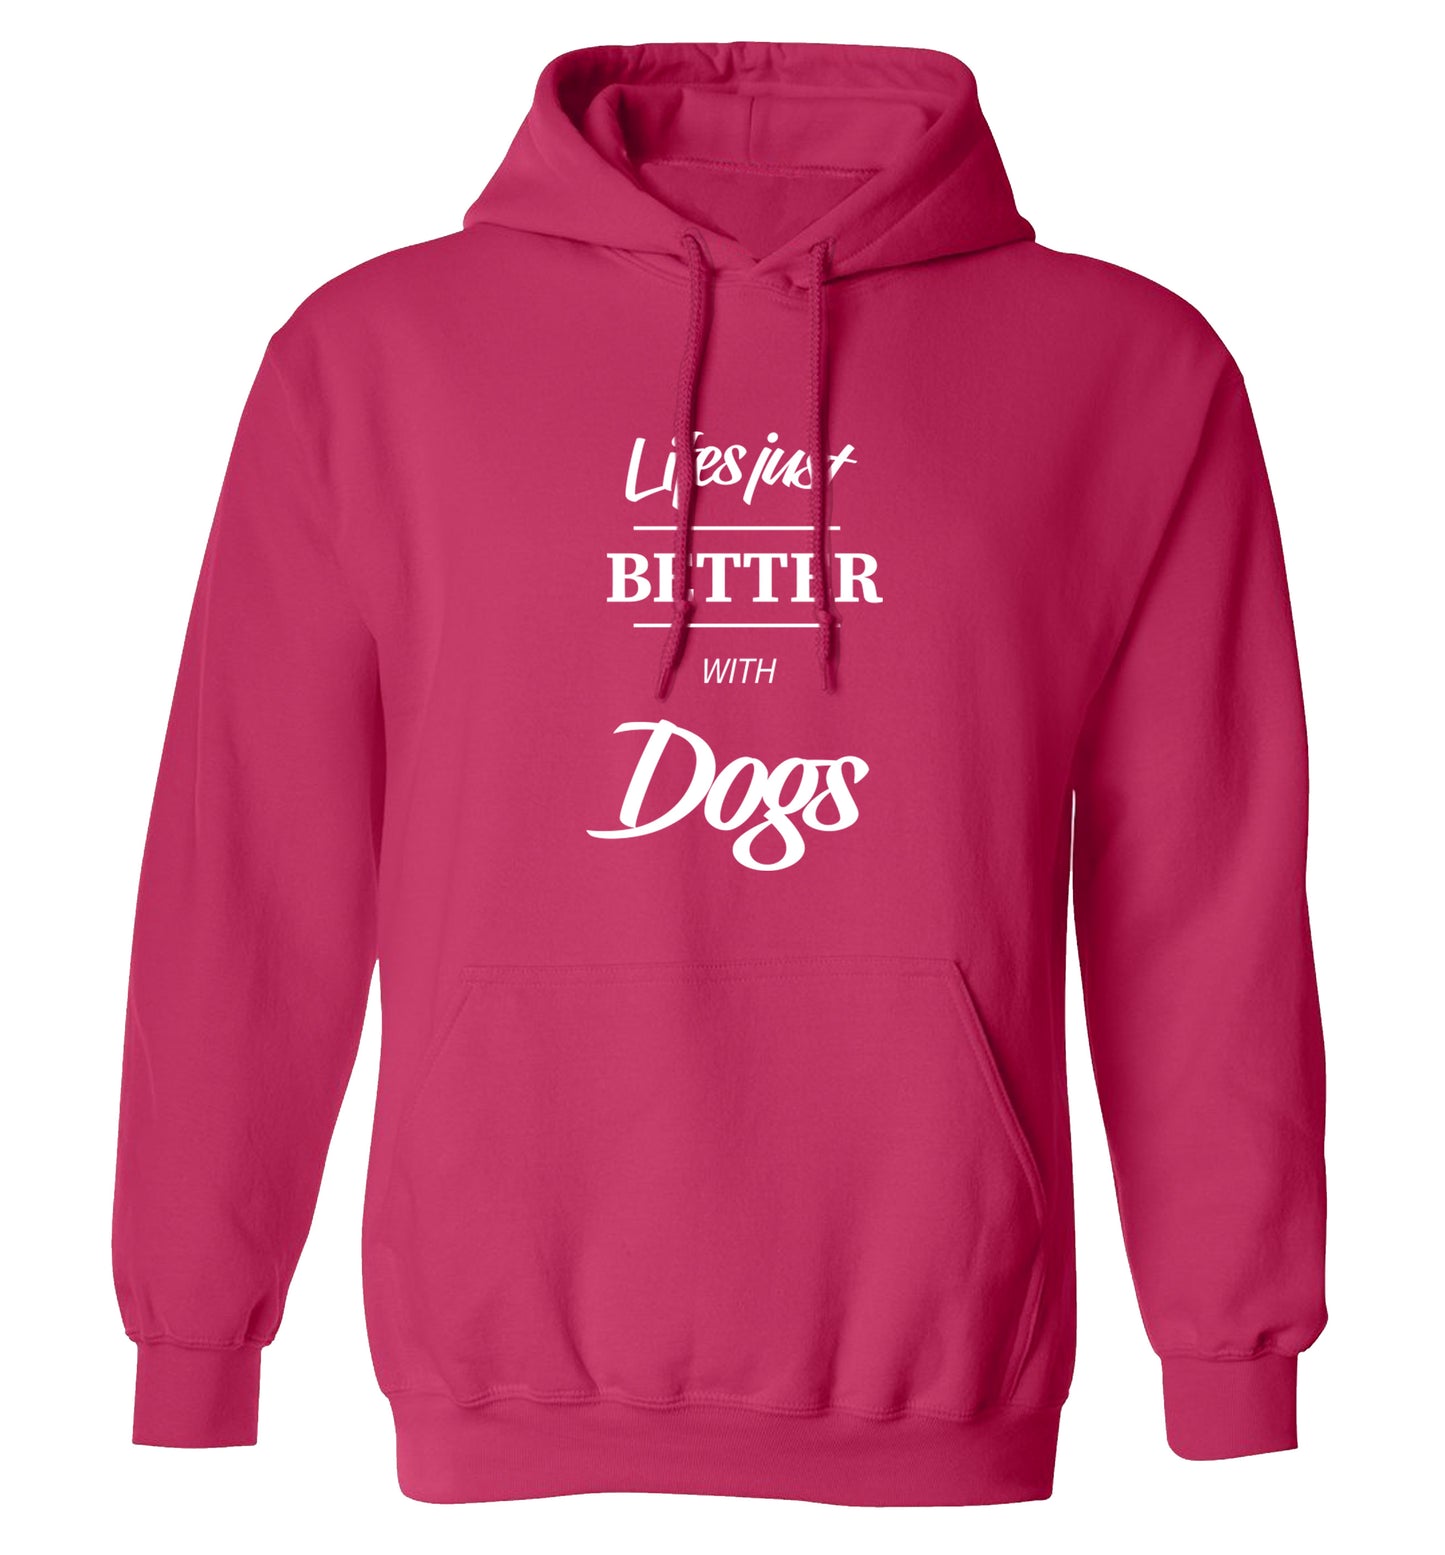 life is better with dogs adults unisex pink hoodie 2XL